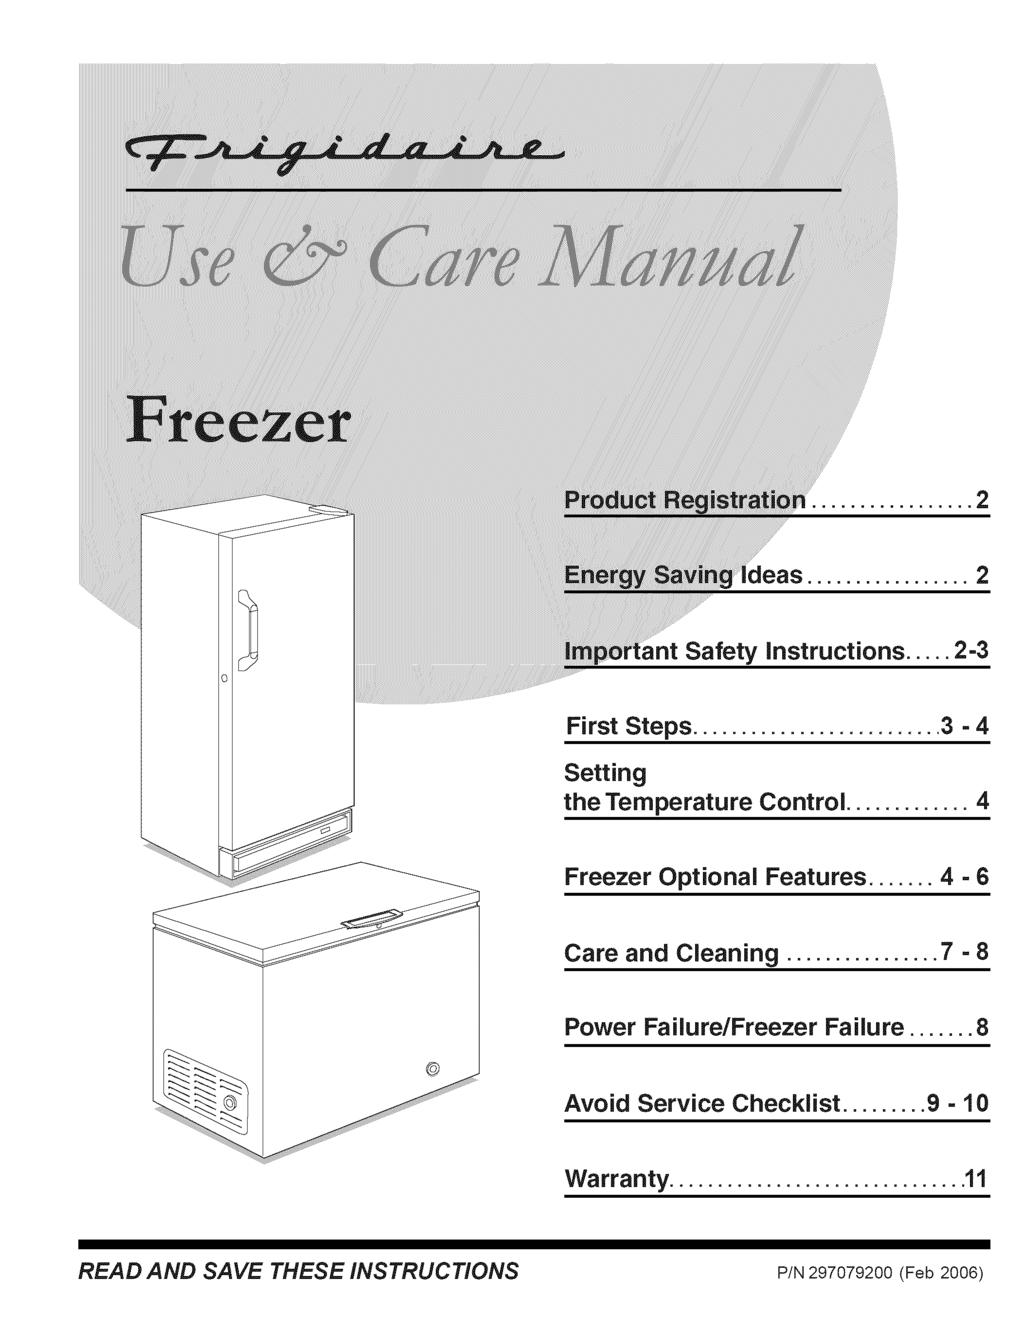 Safety instructions... 2-3 First Steps... 3-4 Setting the Temperature Control... 4 Freezer Optional Features... 4-6 Care and Cleaning.